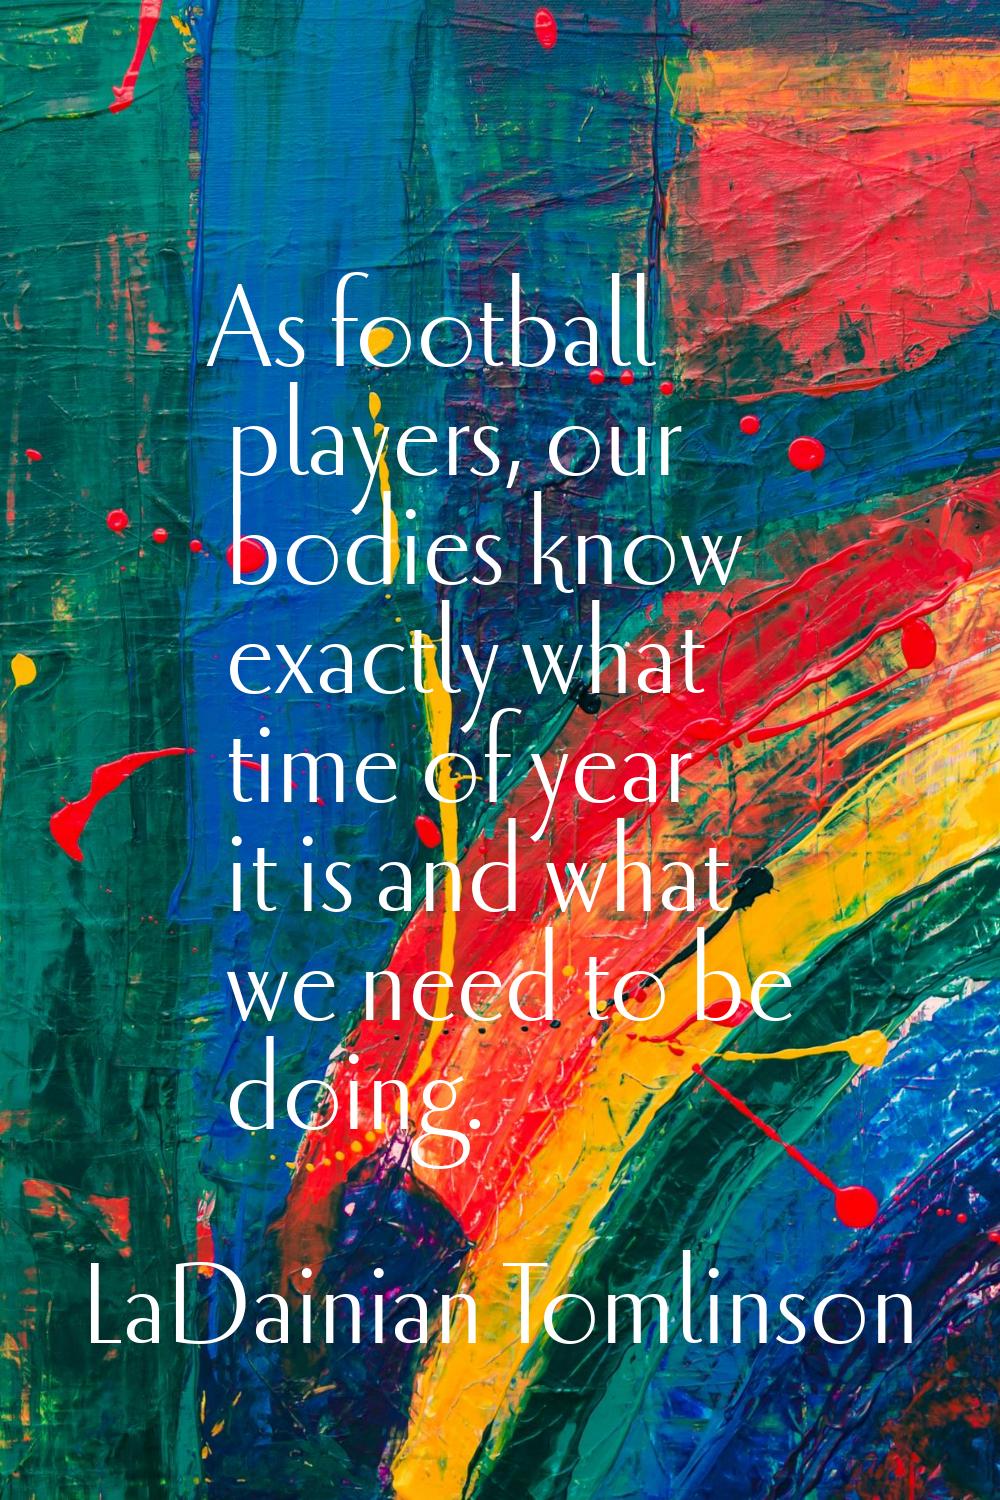 As football players, our bodies know exactly what time of year it is and what we need to be doing.